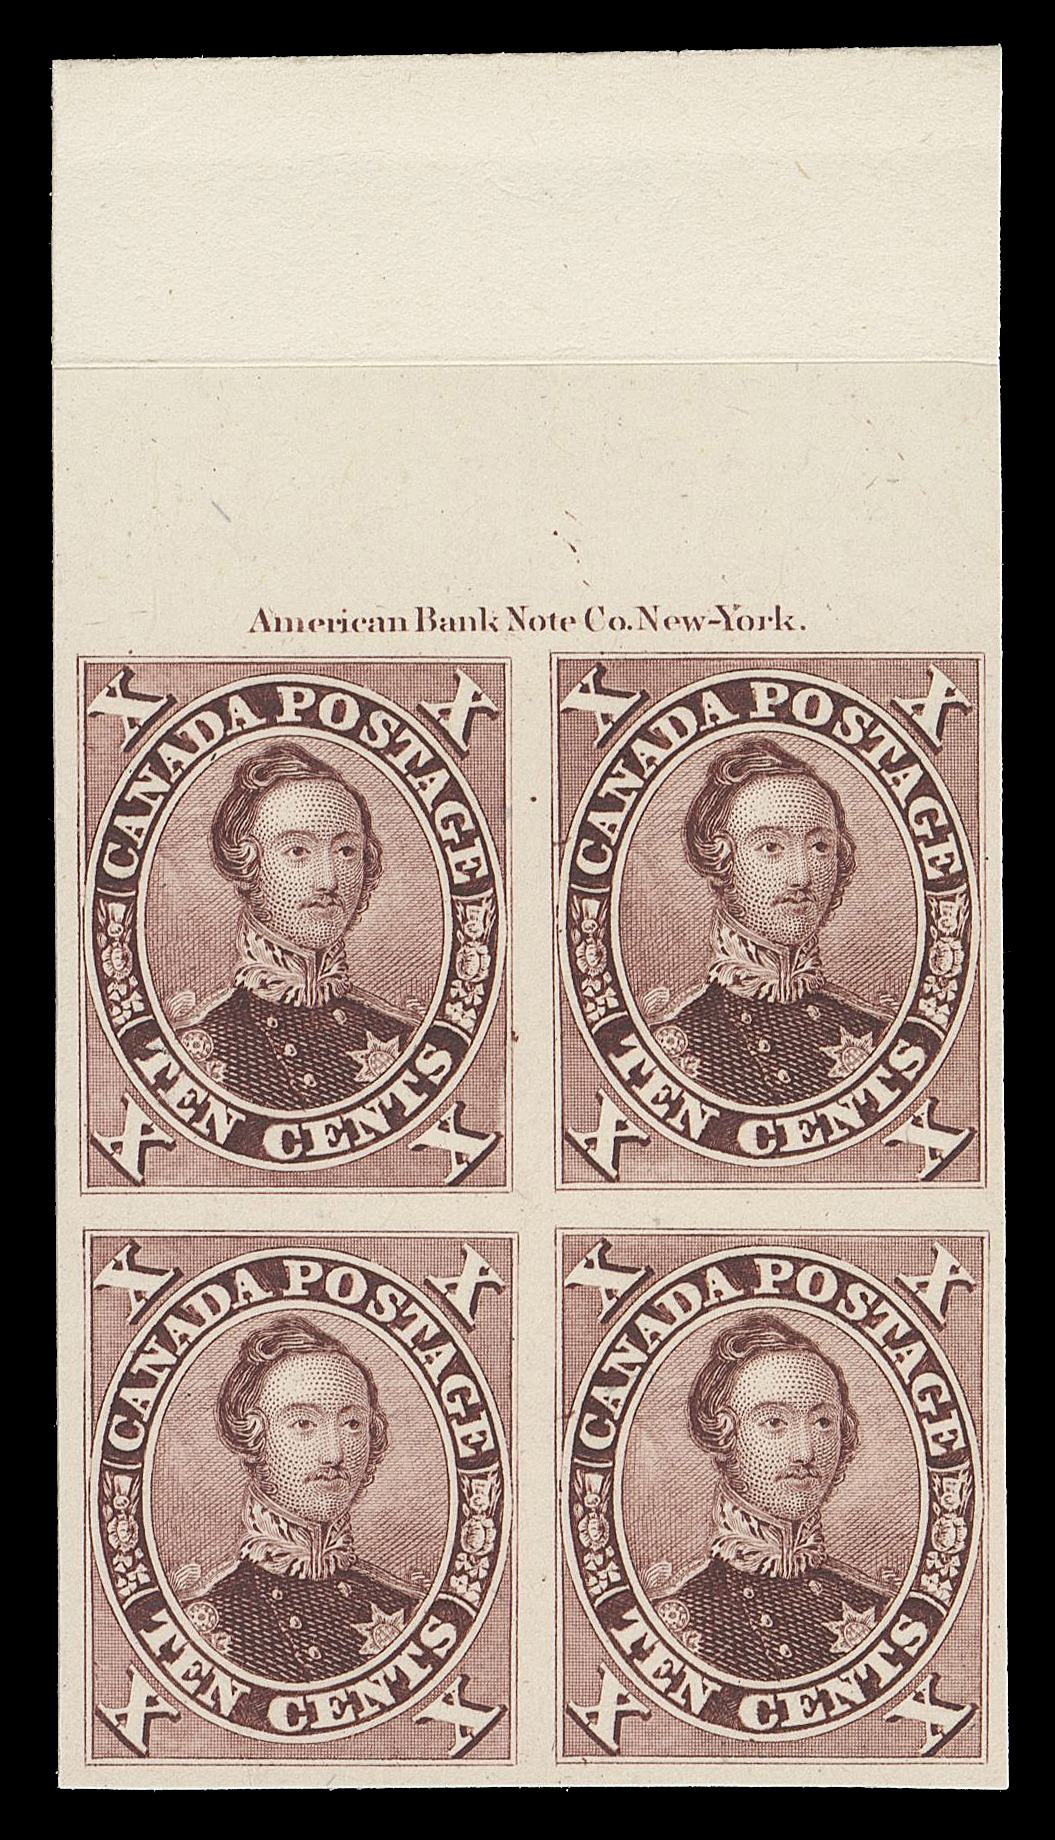 SIX PENCE AND TEN CENTS  17TCi + variety,An attractive, choice plate proof block in brownish purple on  card mounted india paper, showing full ABNC imprint at top  (Positions 8-9 / 18-19) and showing the "C" Flaw on both proofs  in right column, VF (Unitrade cat. as normal  single proofs)

The "C" Flaw variety is found on stamps from the last two columns of the sheet with ABNC imprint, appearing on Printing Orders  starting around November 1864.